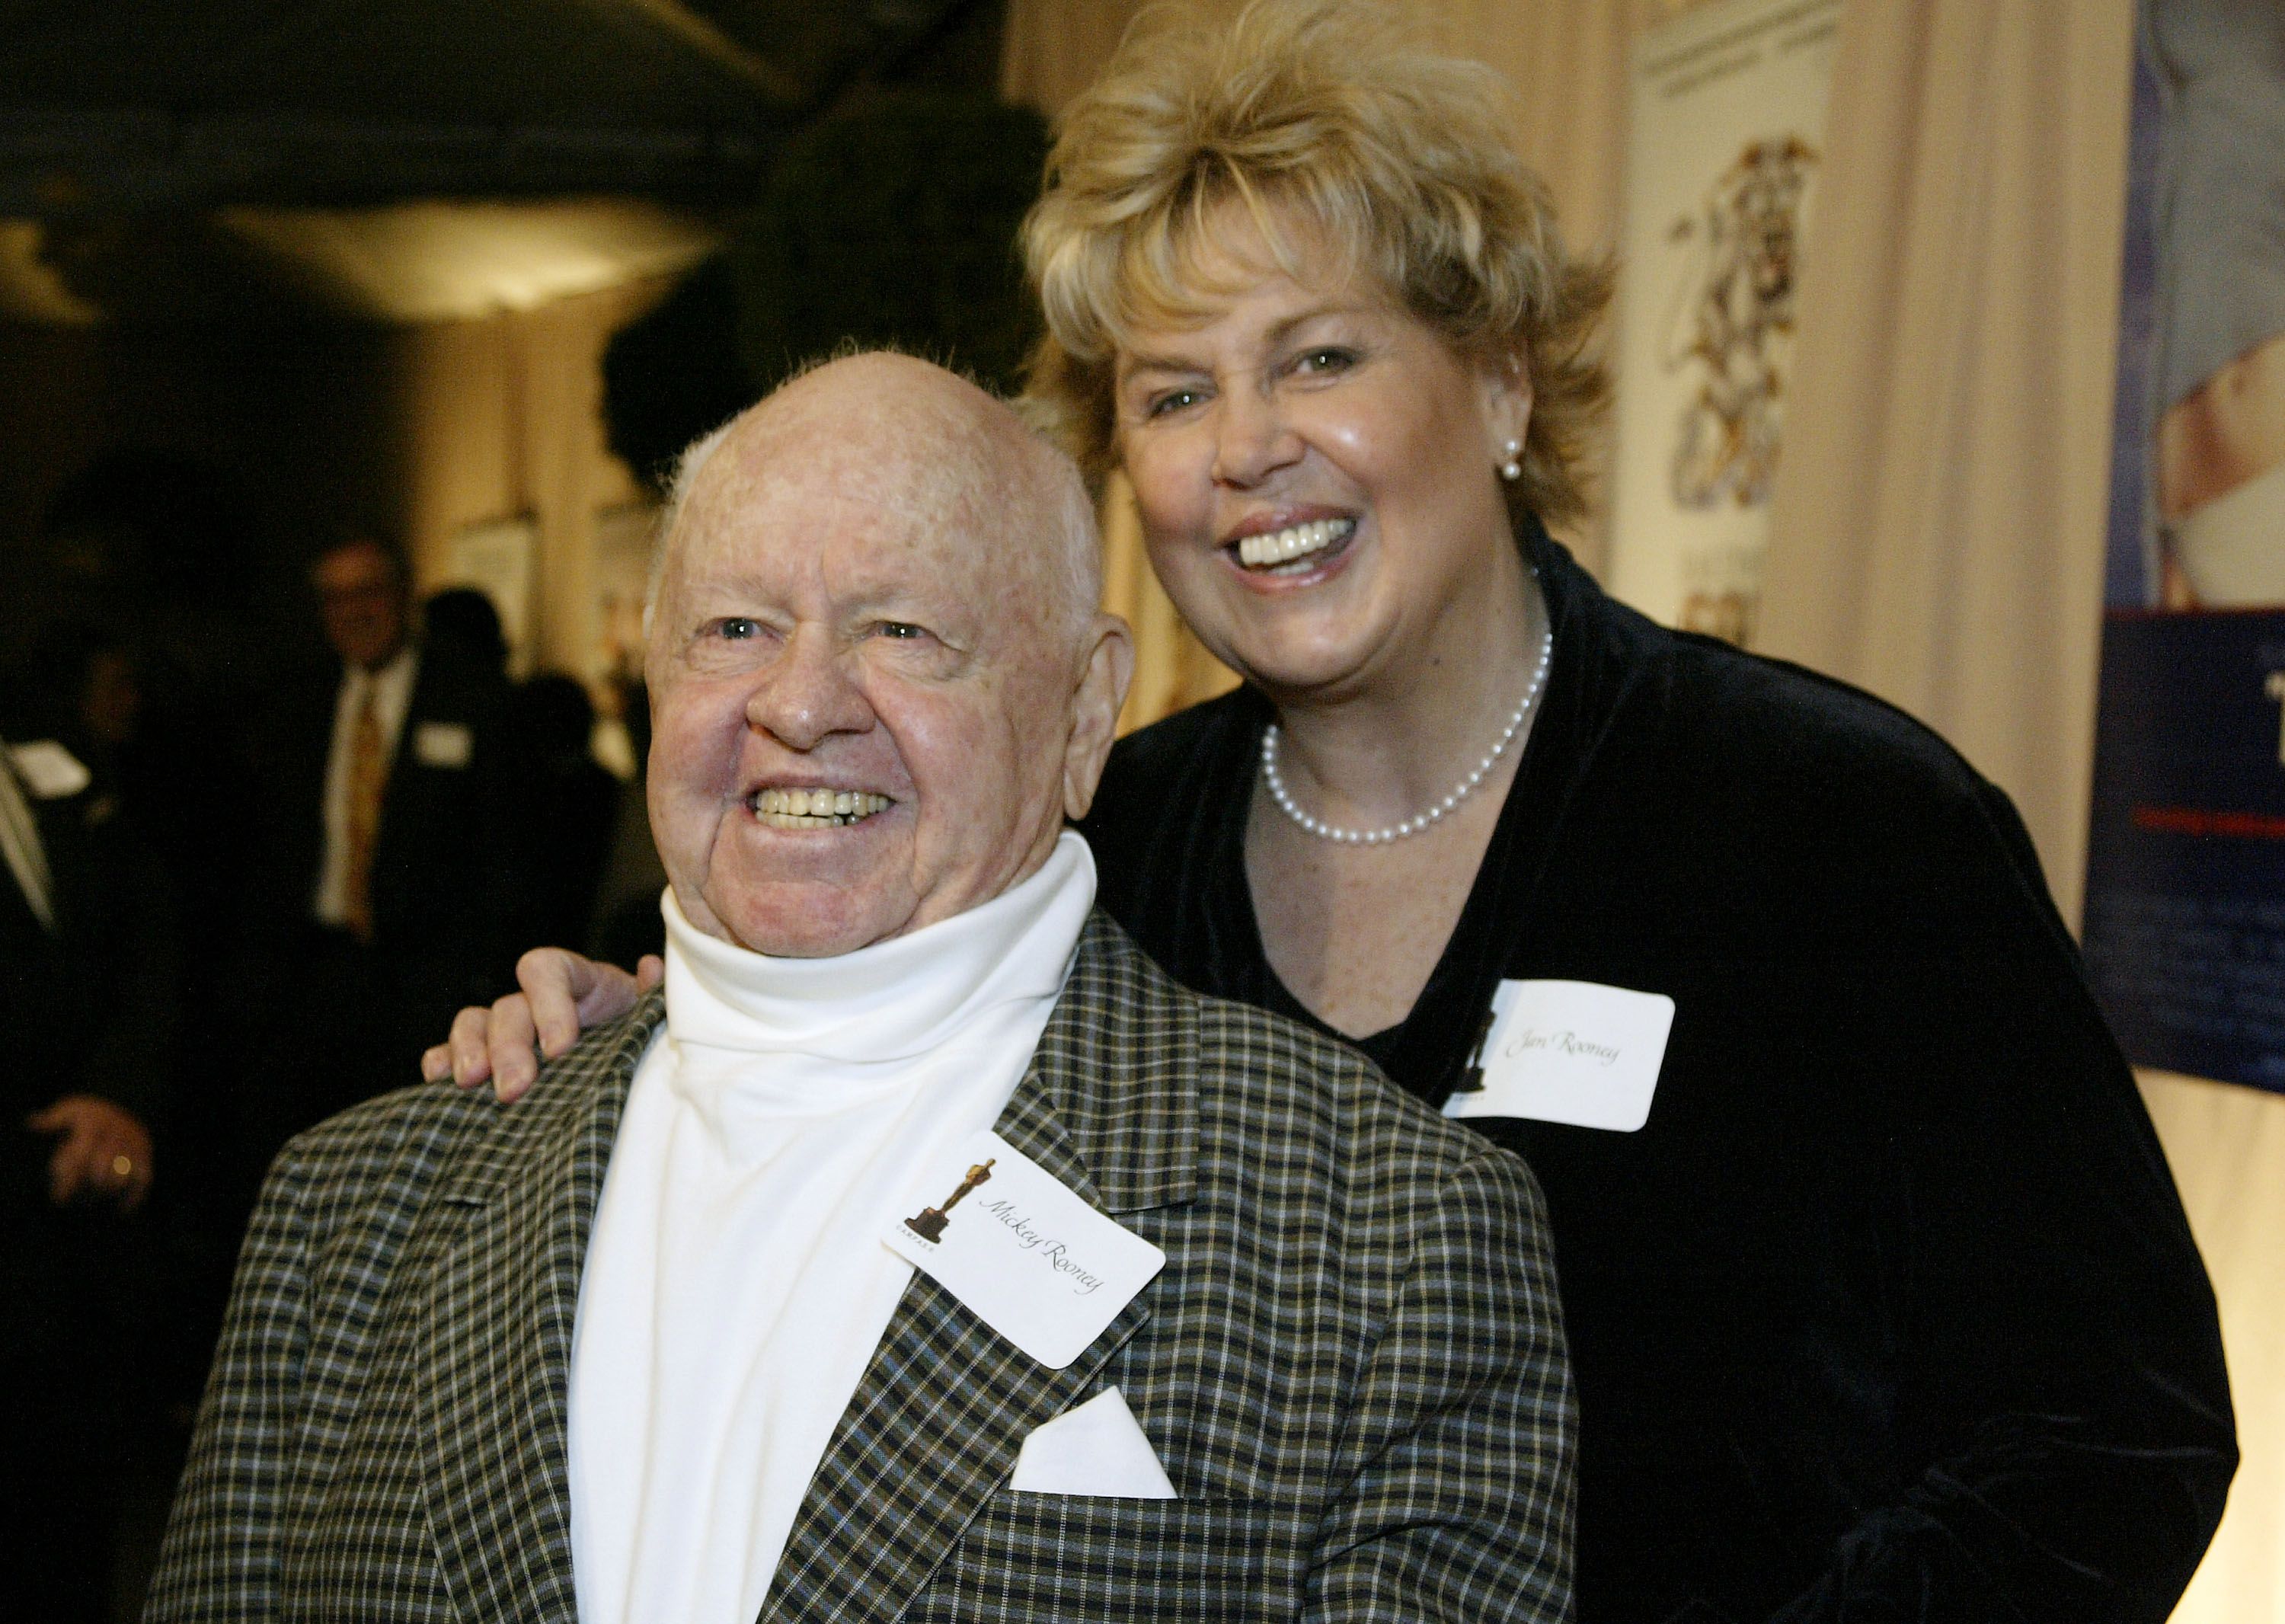 Mickey and wife Jan Rooney at a reception in honor of director Blake Edwards on February 26, 2004, at The Annex in Hollywood, California | Photo: Doug Benc/Getty Images